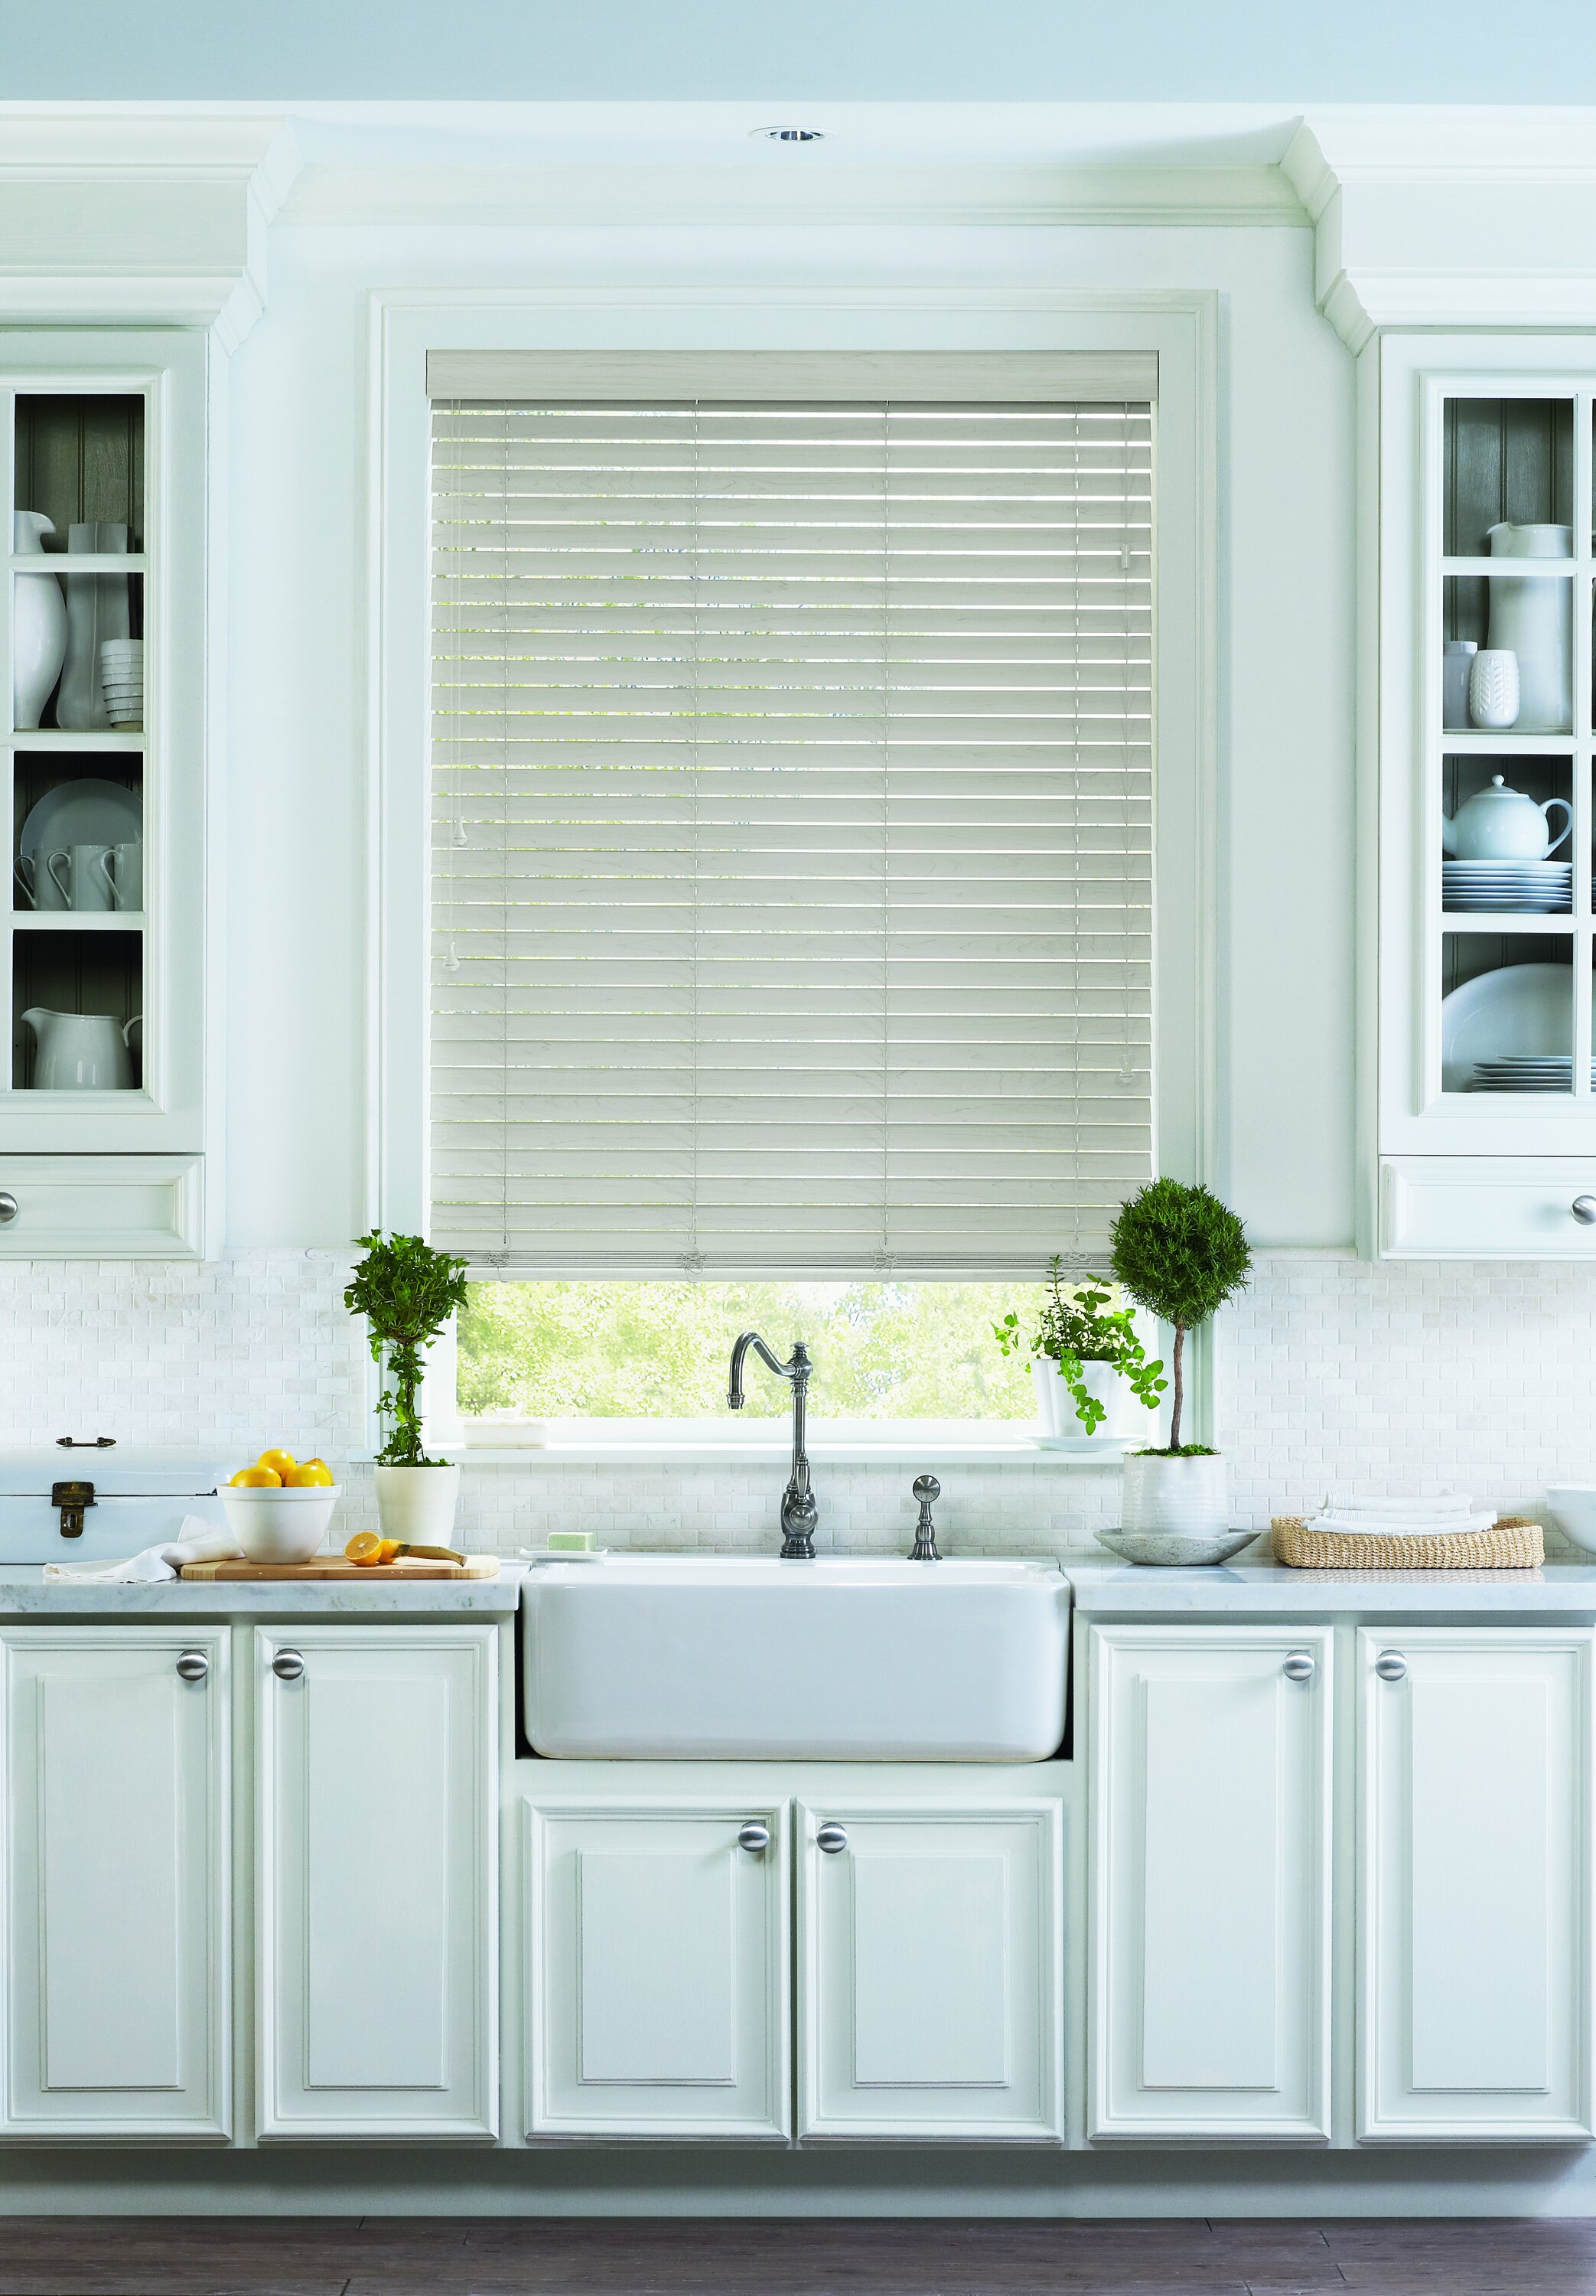  Hunter Douglas EverWood® Alternative Wood Blinds are backed by our industry-exclusive Performance Plus™ Protection which covers fading, yellowing, warping and bowing for the life of the product 